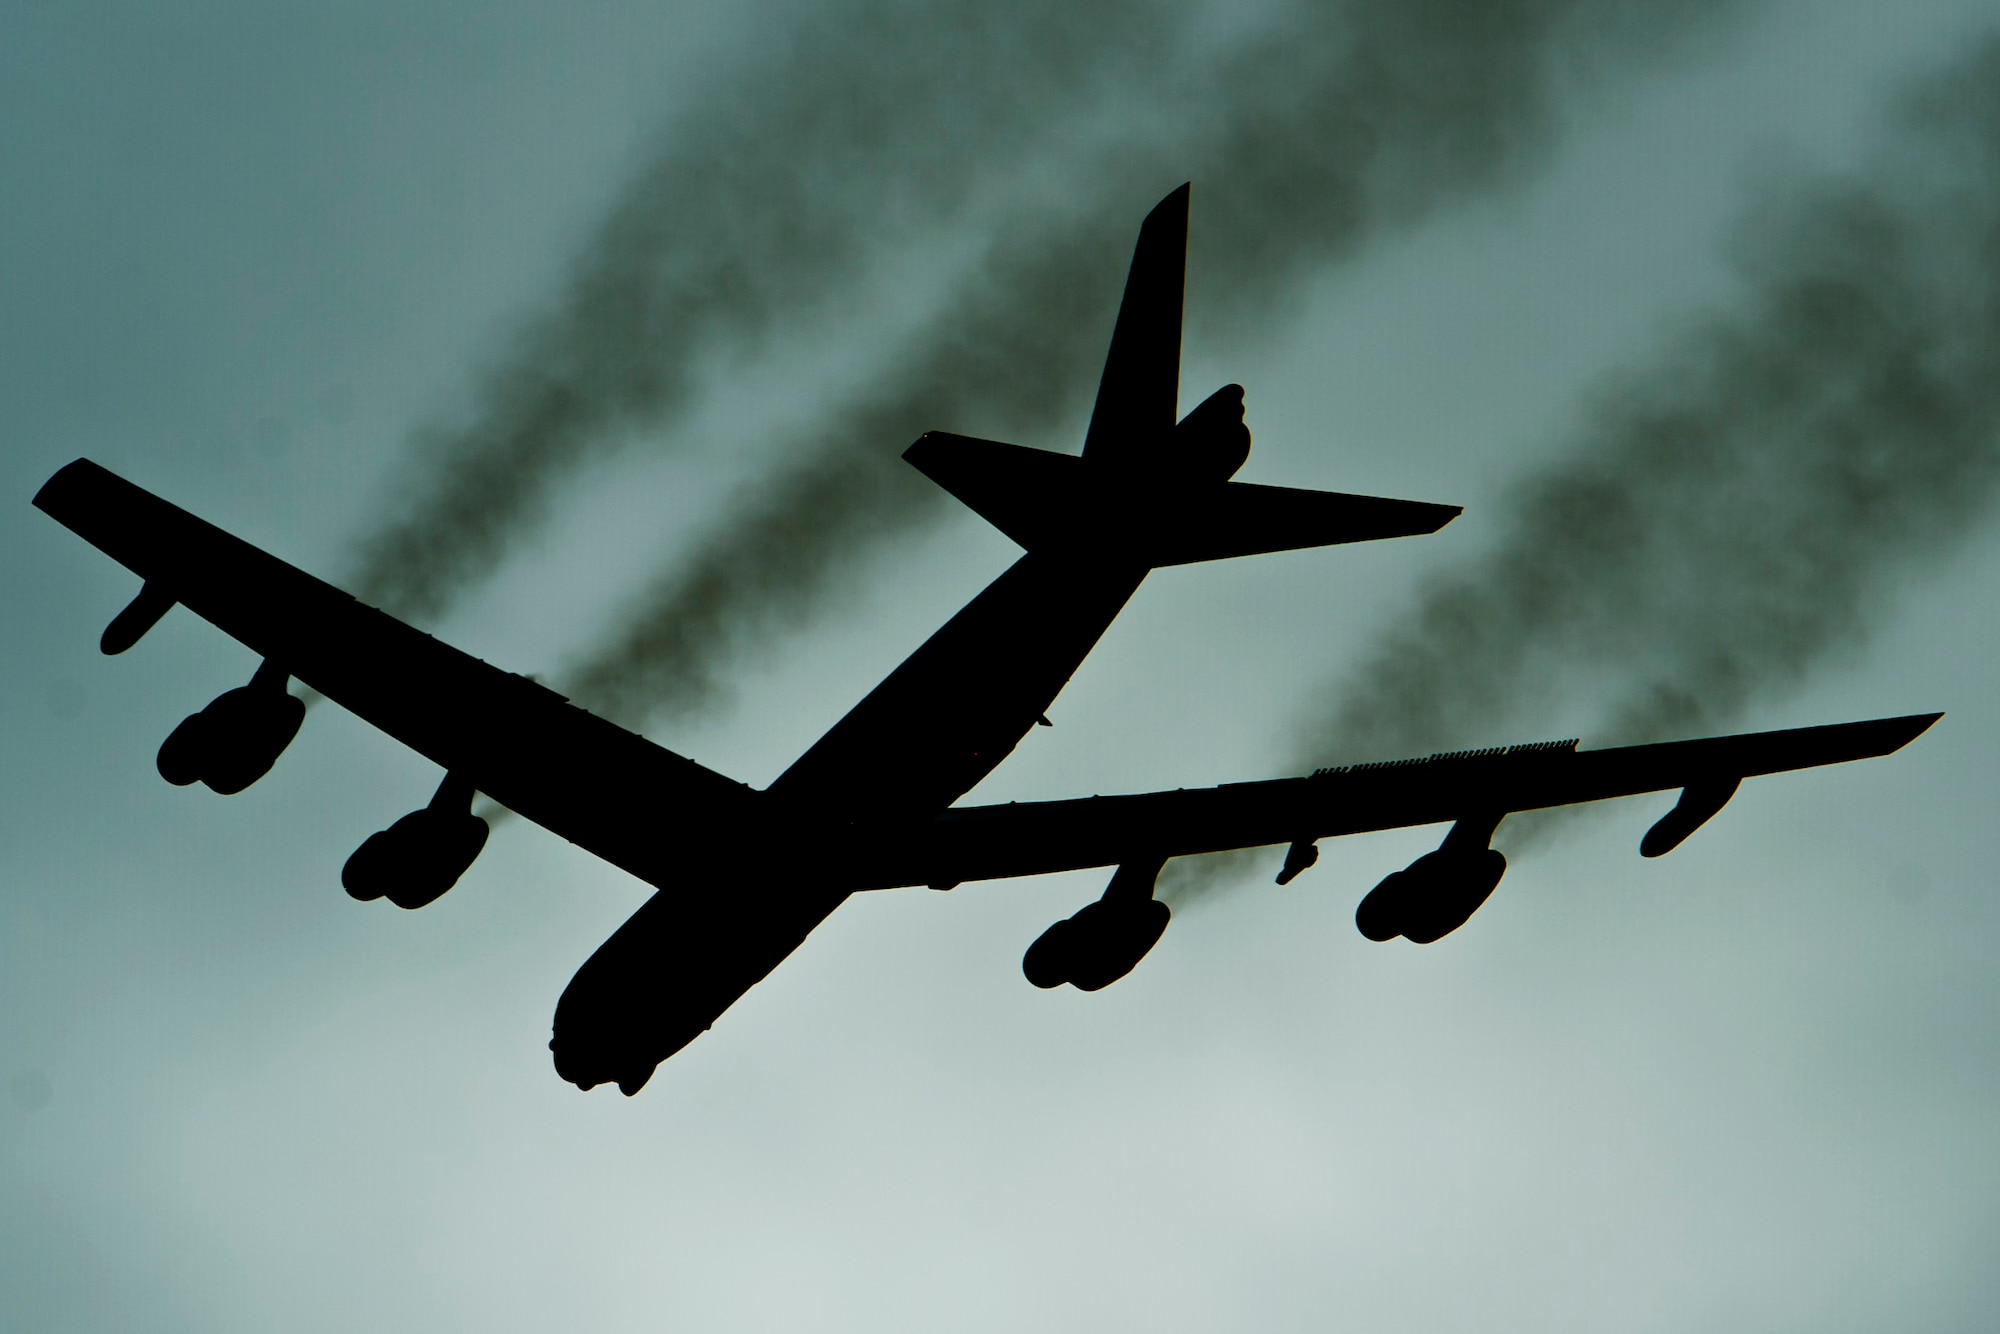 A B-52H Stratofortress assigned to Air Force Global Strike Command (AFGSC) flies over Minot Air Force Base, N.D., Oct. 30, 2016, during exercise Global Thunder 17. AFGSC supports U.S. Strategic Command's (USSTRATCOM) global strike and nuclear deterrence missions by providing strategic assets, including bombers like the B-52 and B-2, to ensure a safe, secure, effective and ready deterrent force. Global Thunder is an annual training event that assesses command and control functionality in all USSTRATCOM mission areas and affords component commands a venue to evaluate their joint operational readiness. (U.S. Air Force photo/Airman 1st Class J.T. Armstrong)